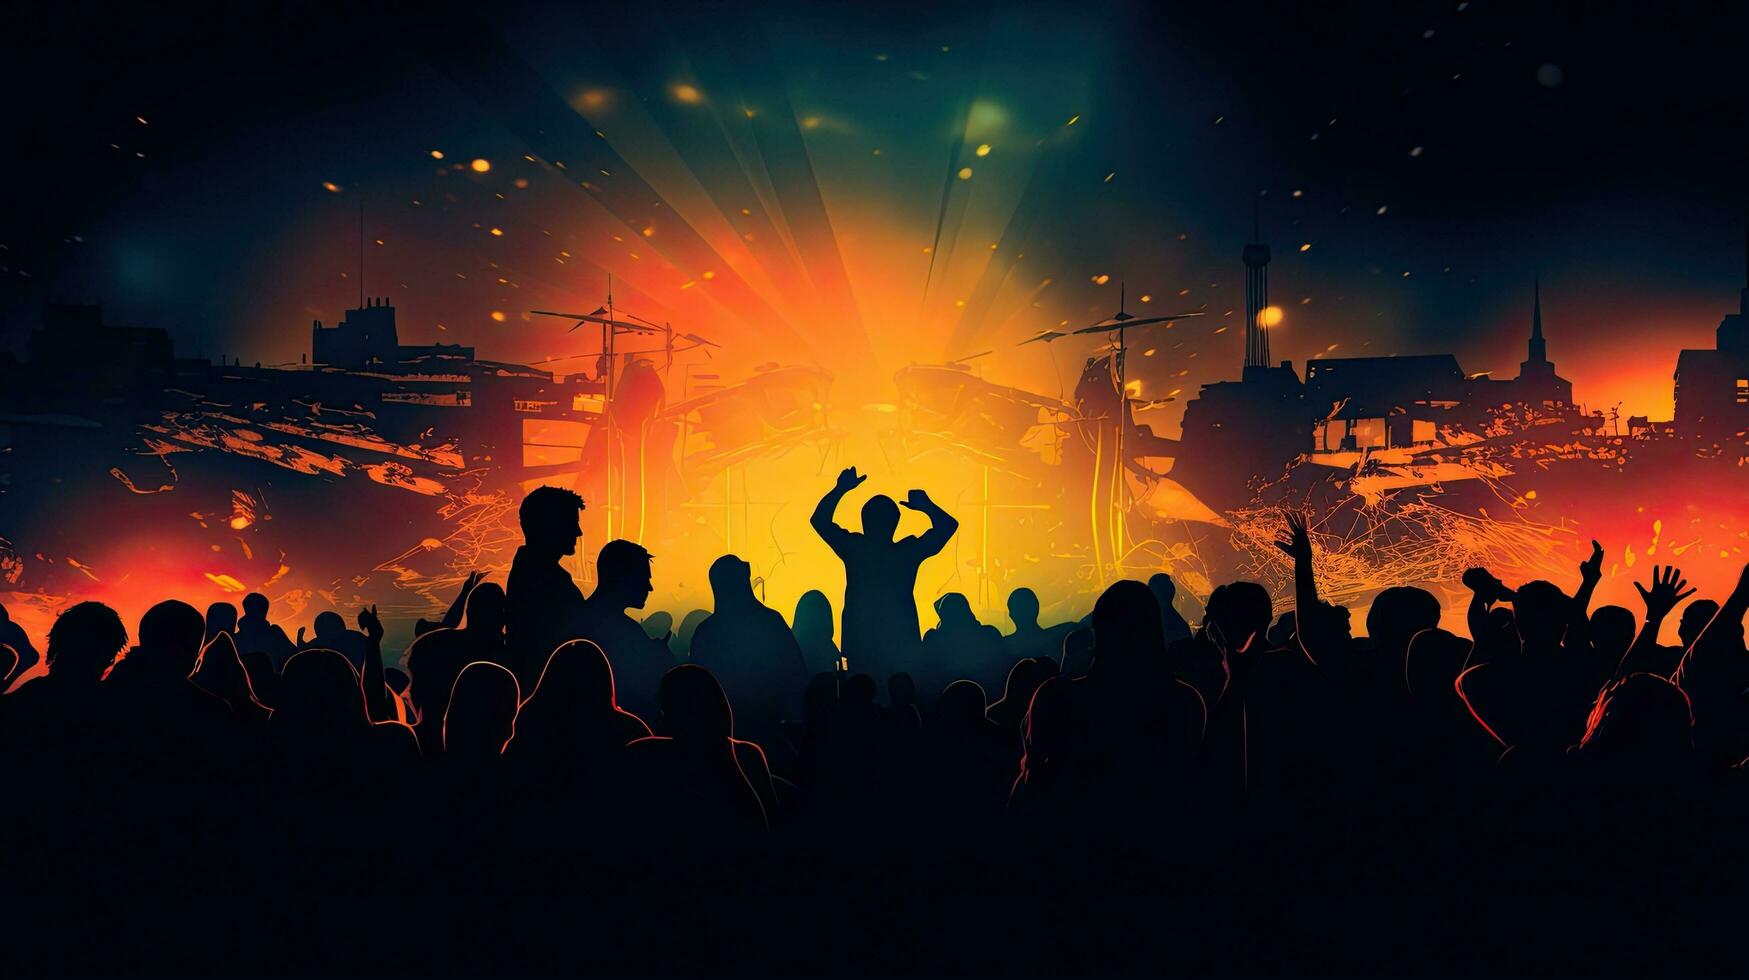 Background image of people at a concert photo